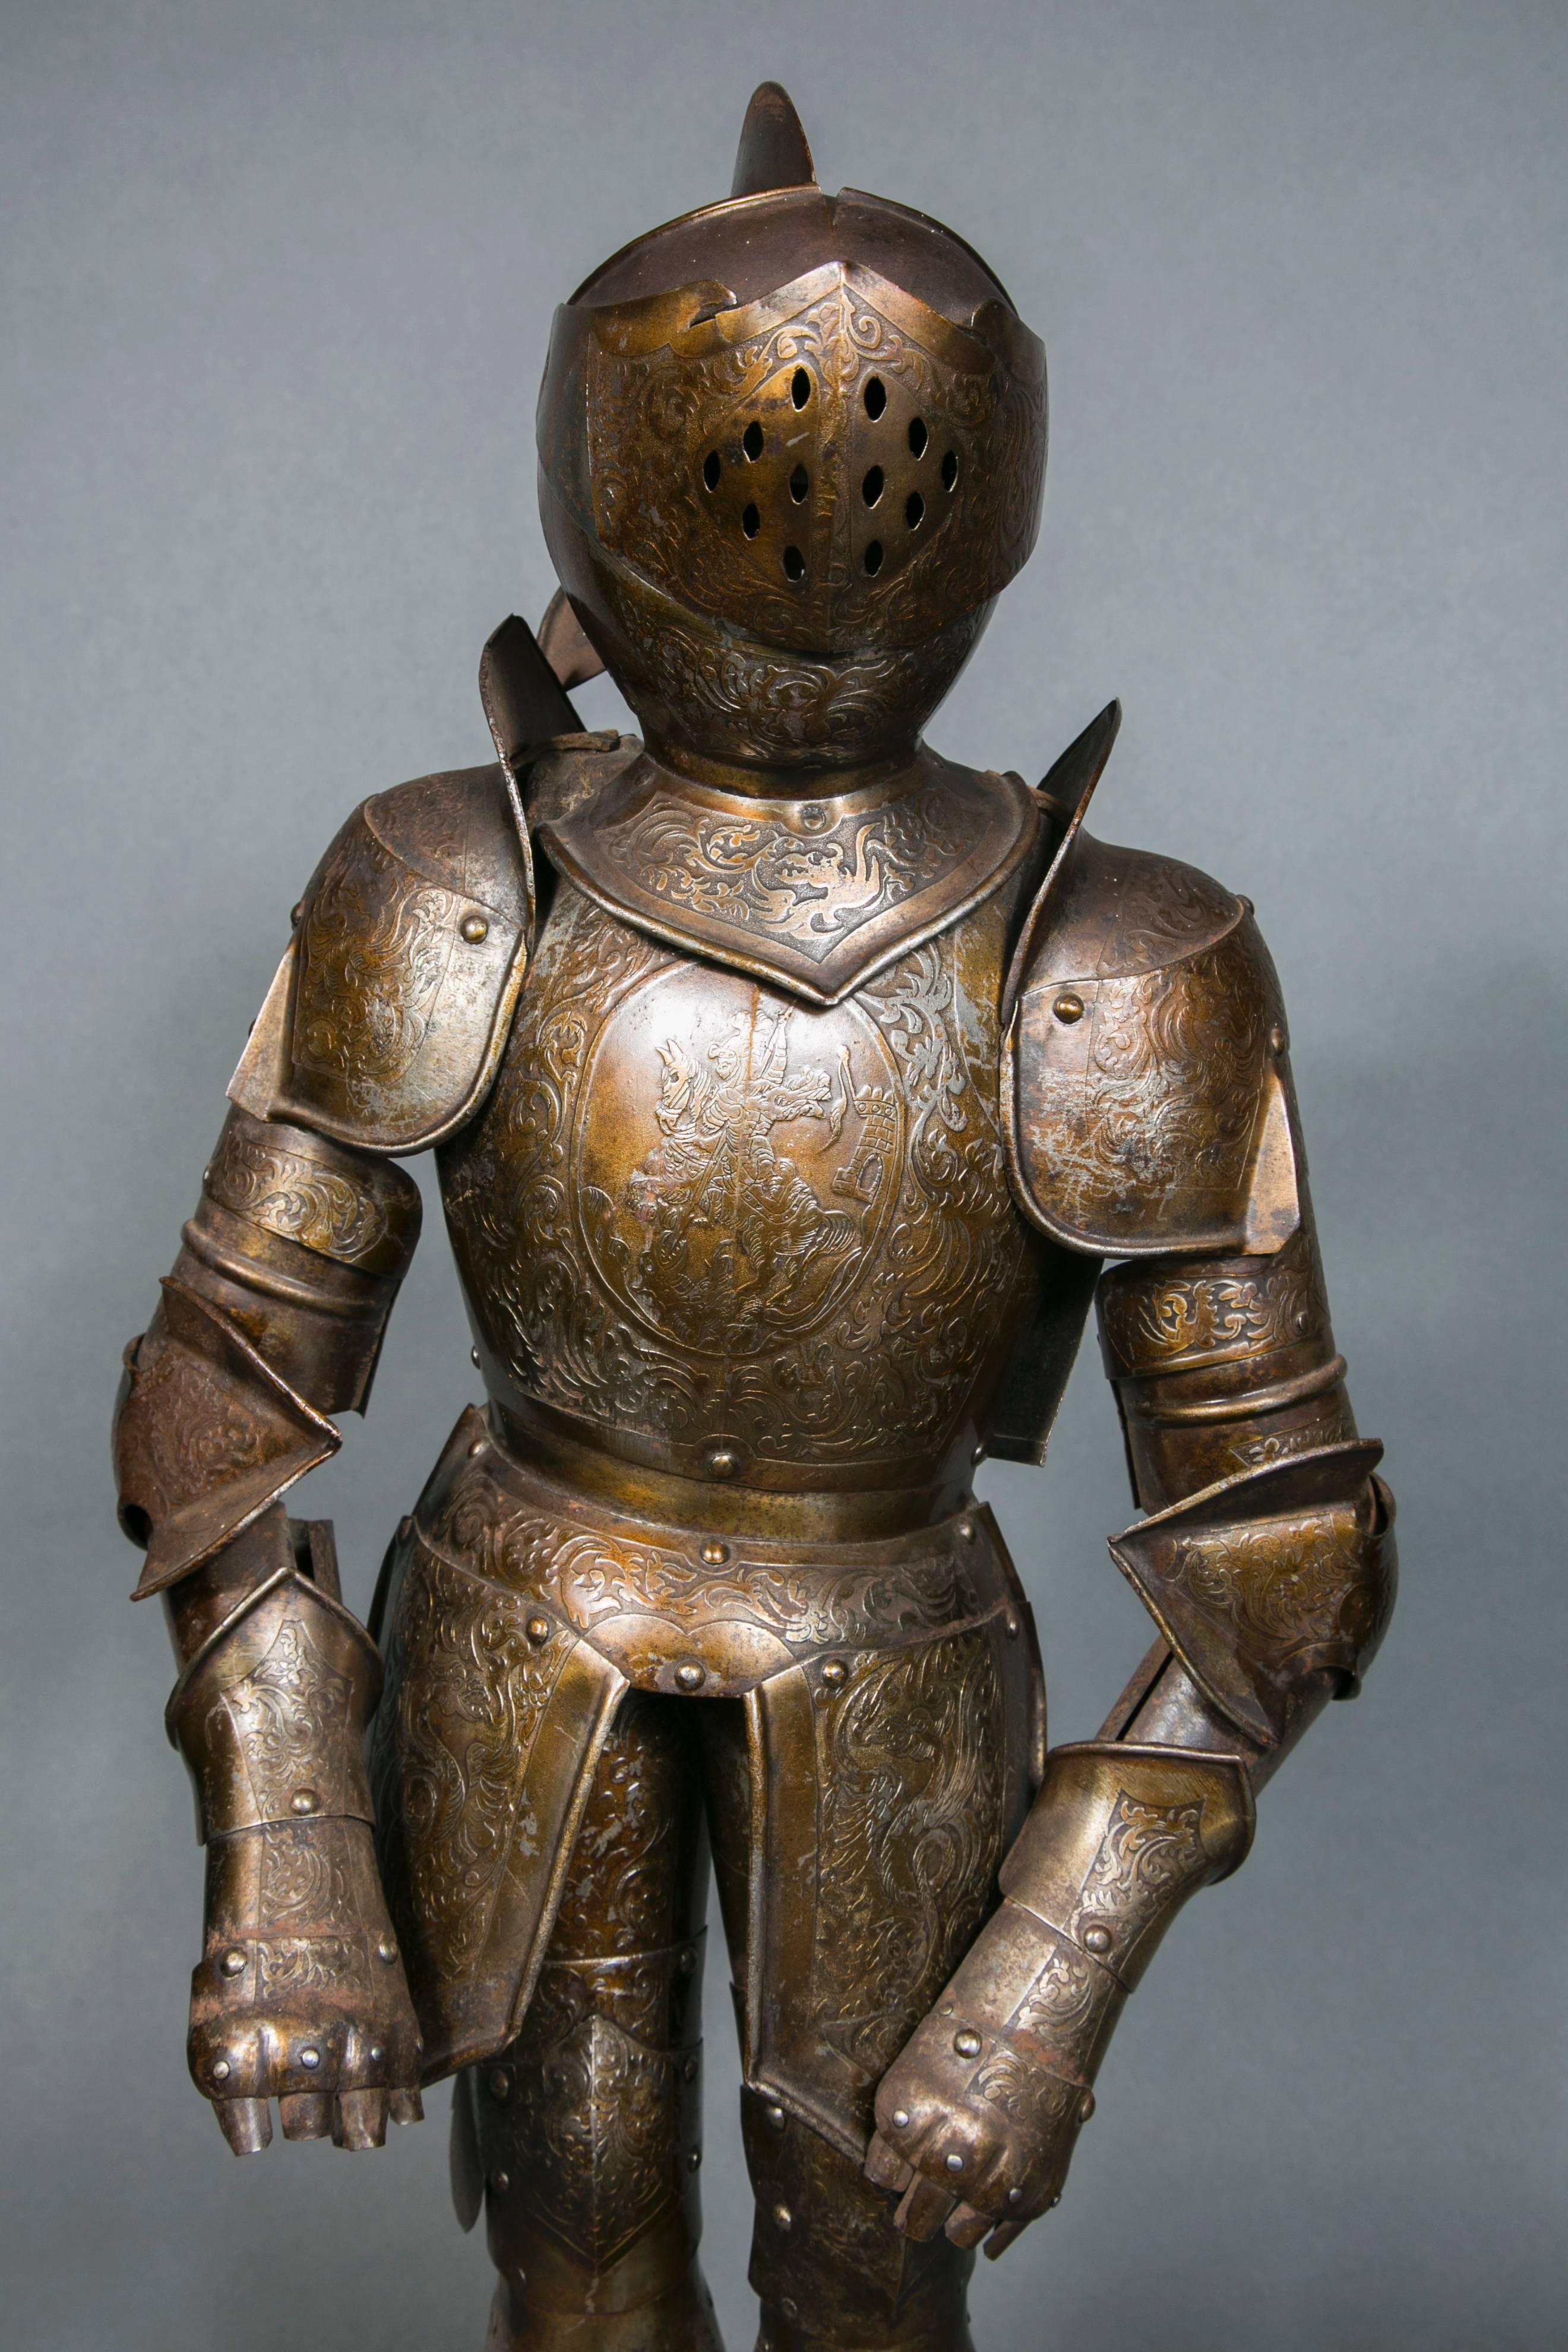 Metal Miniature Medieval Armor in the Spirit of Viollet Le Duc